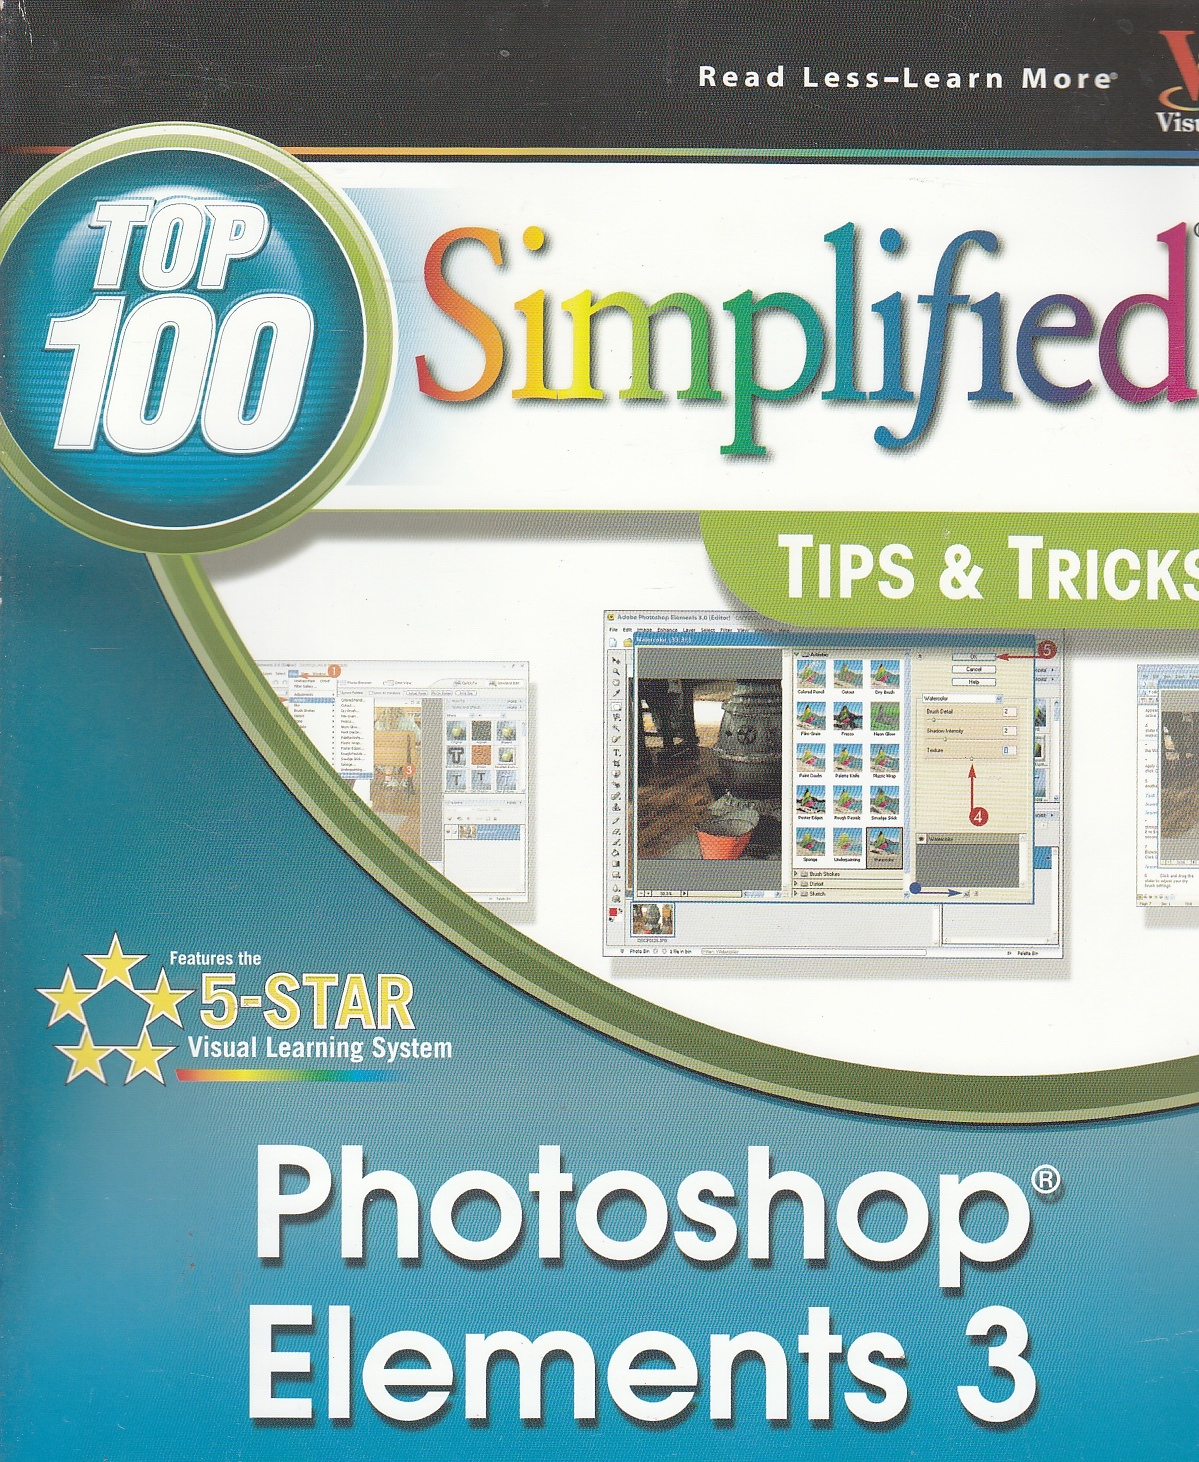 Image for Photoshop Elements 3 Top 100 Simplified Tips & Tricks